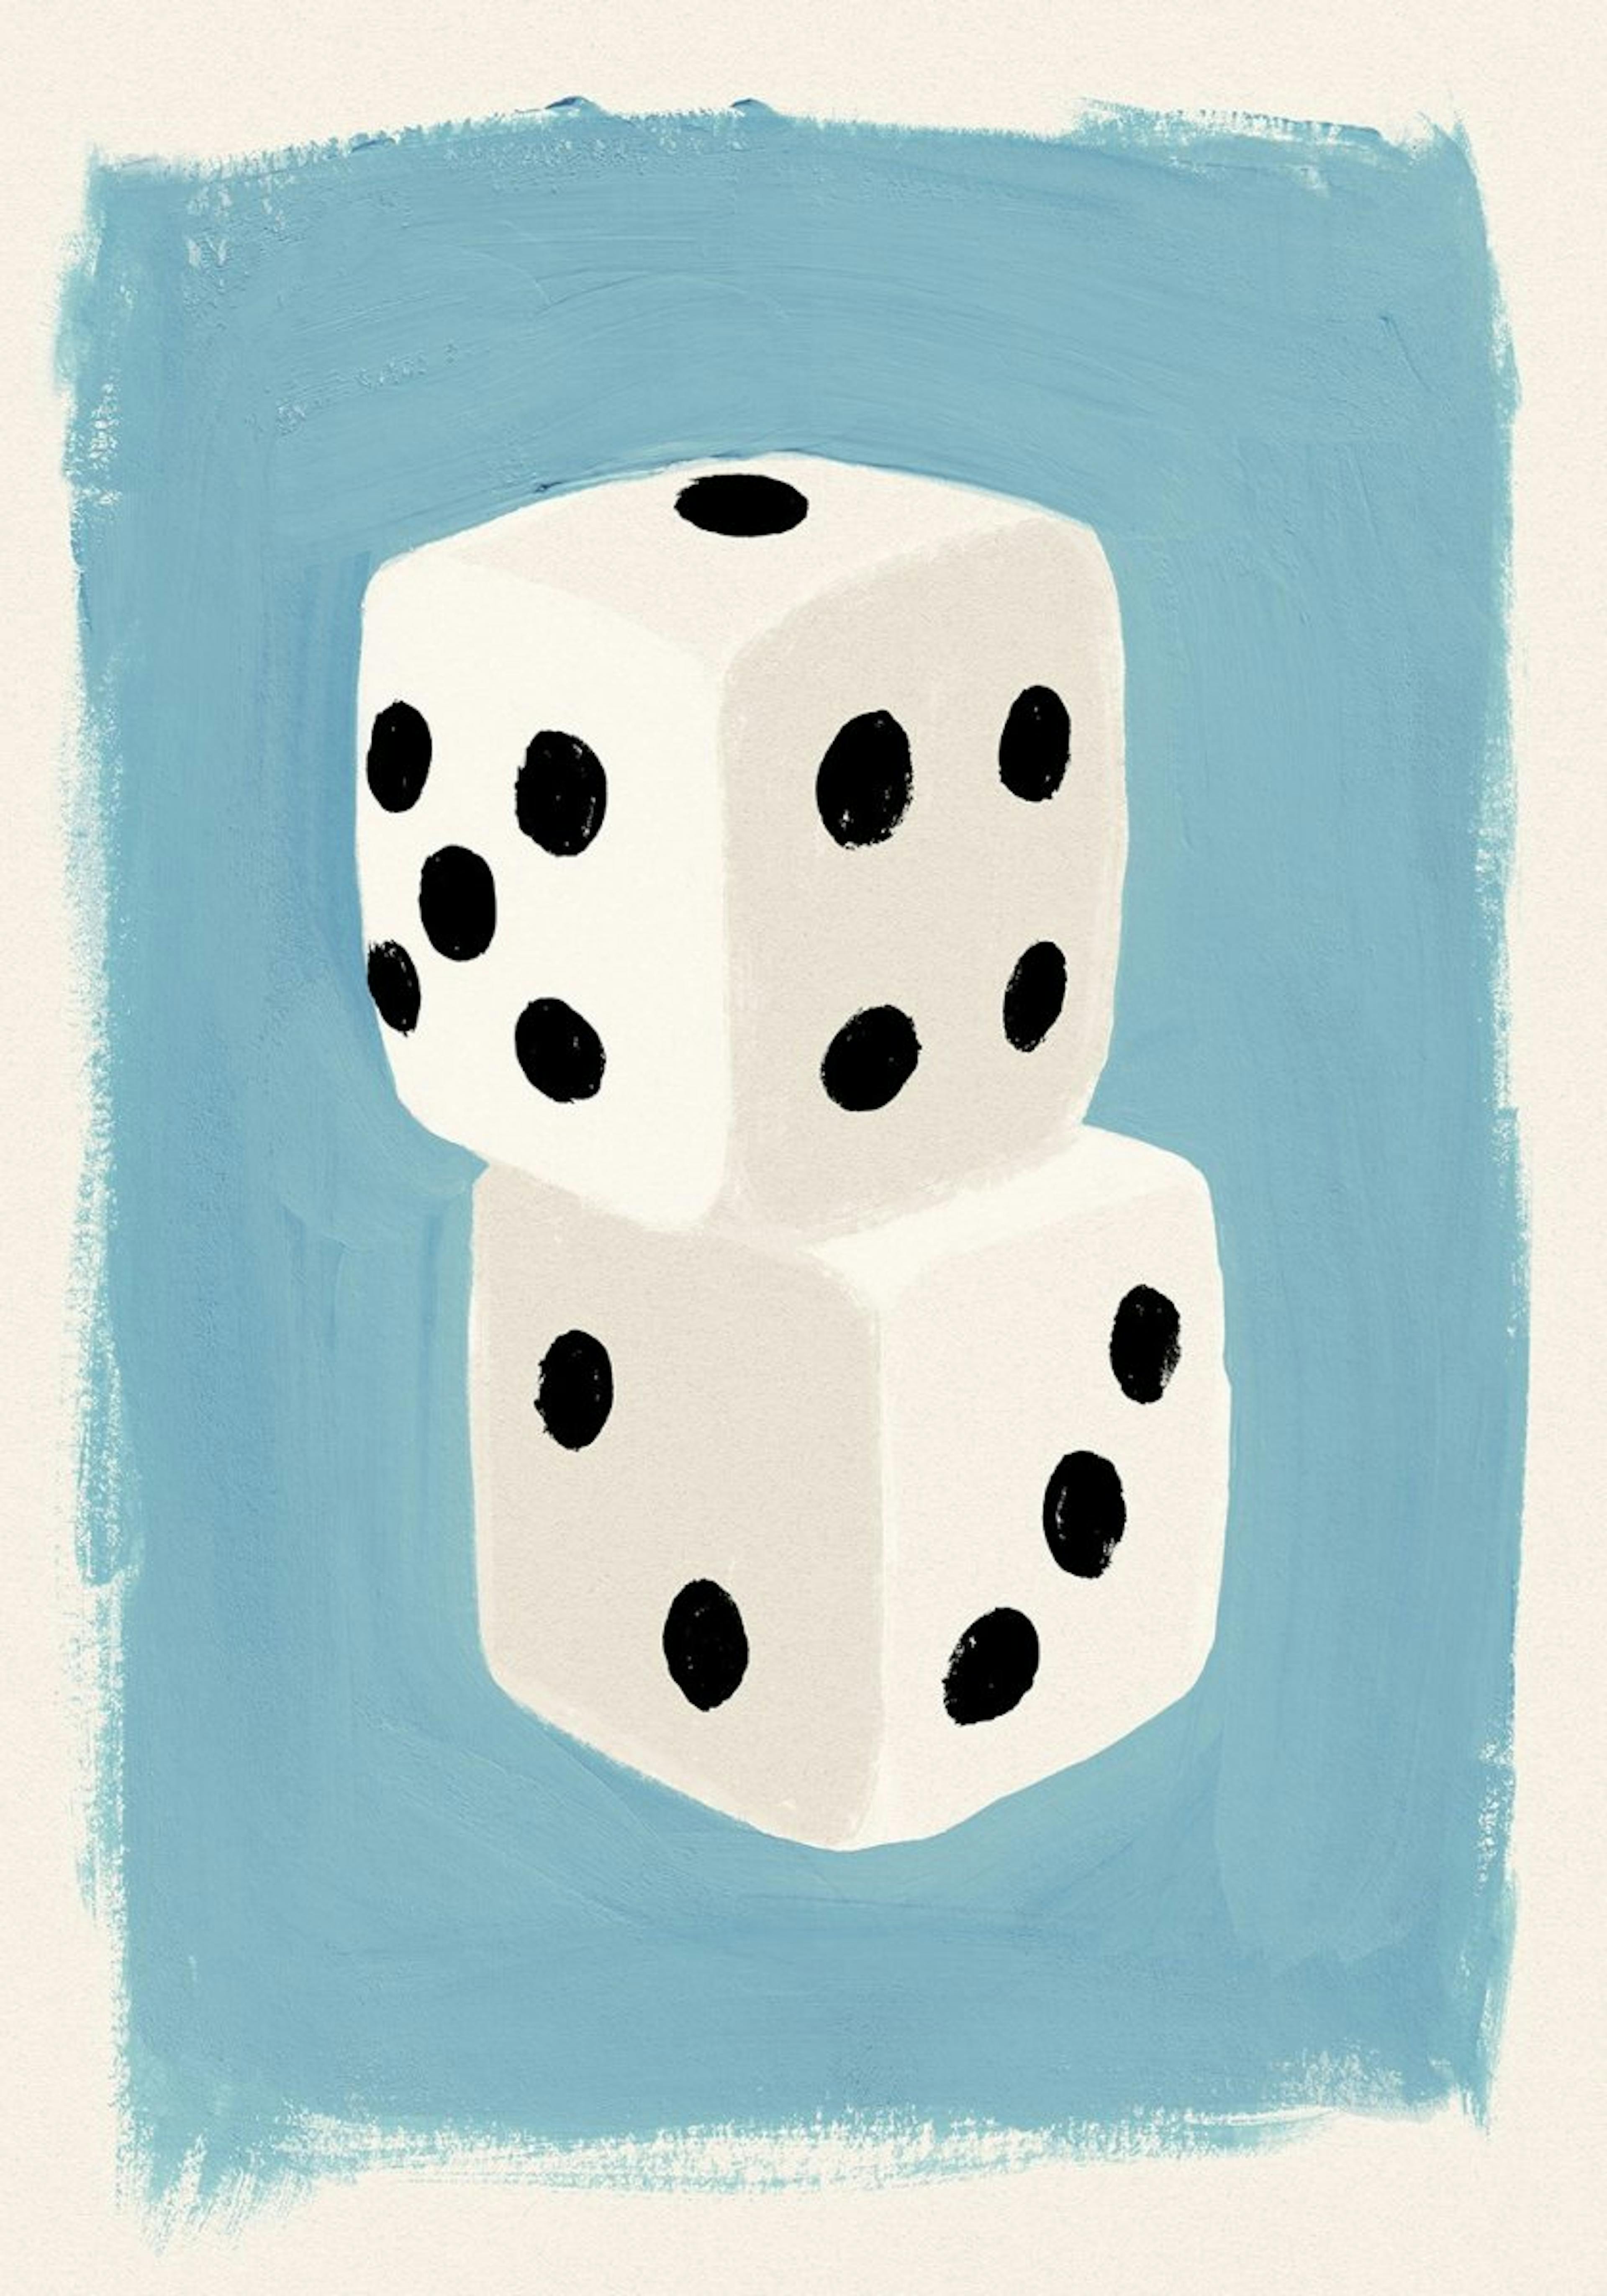 Throw the Dice Poster 0